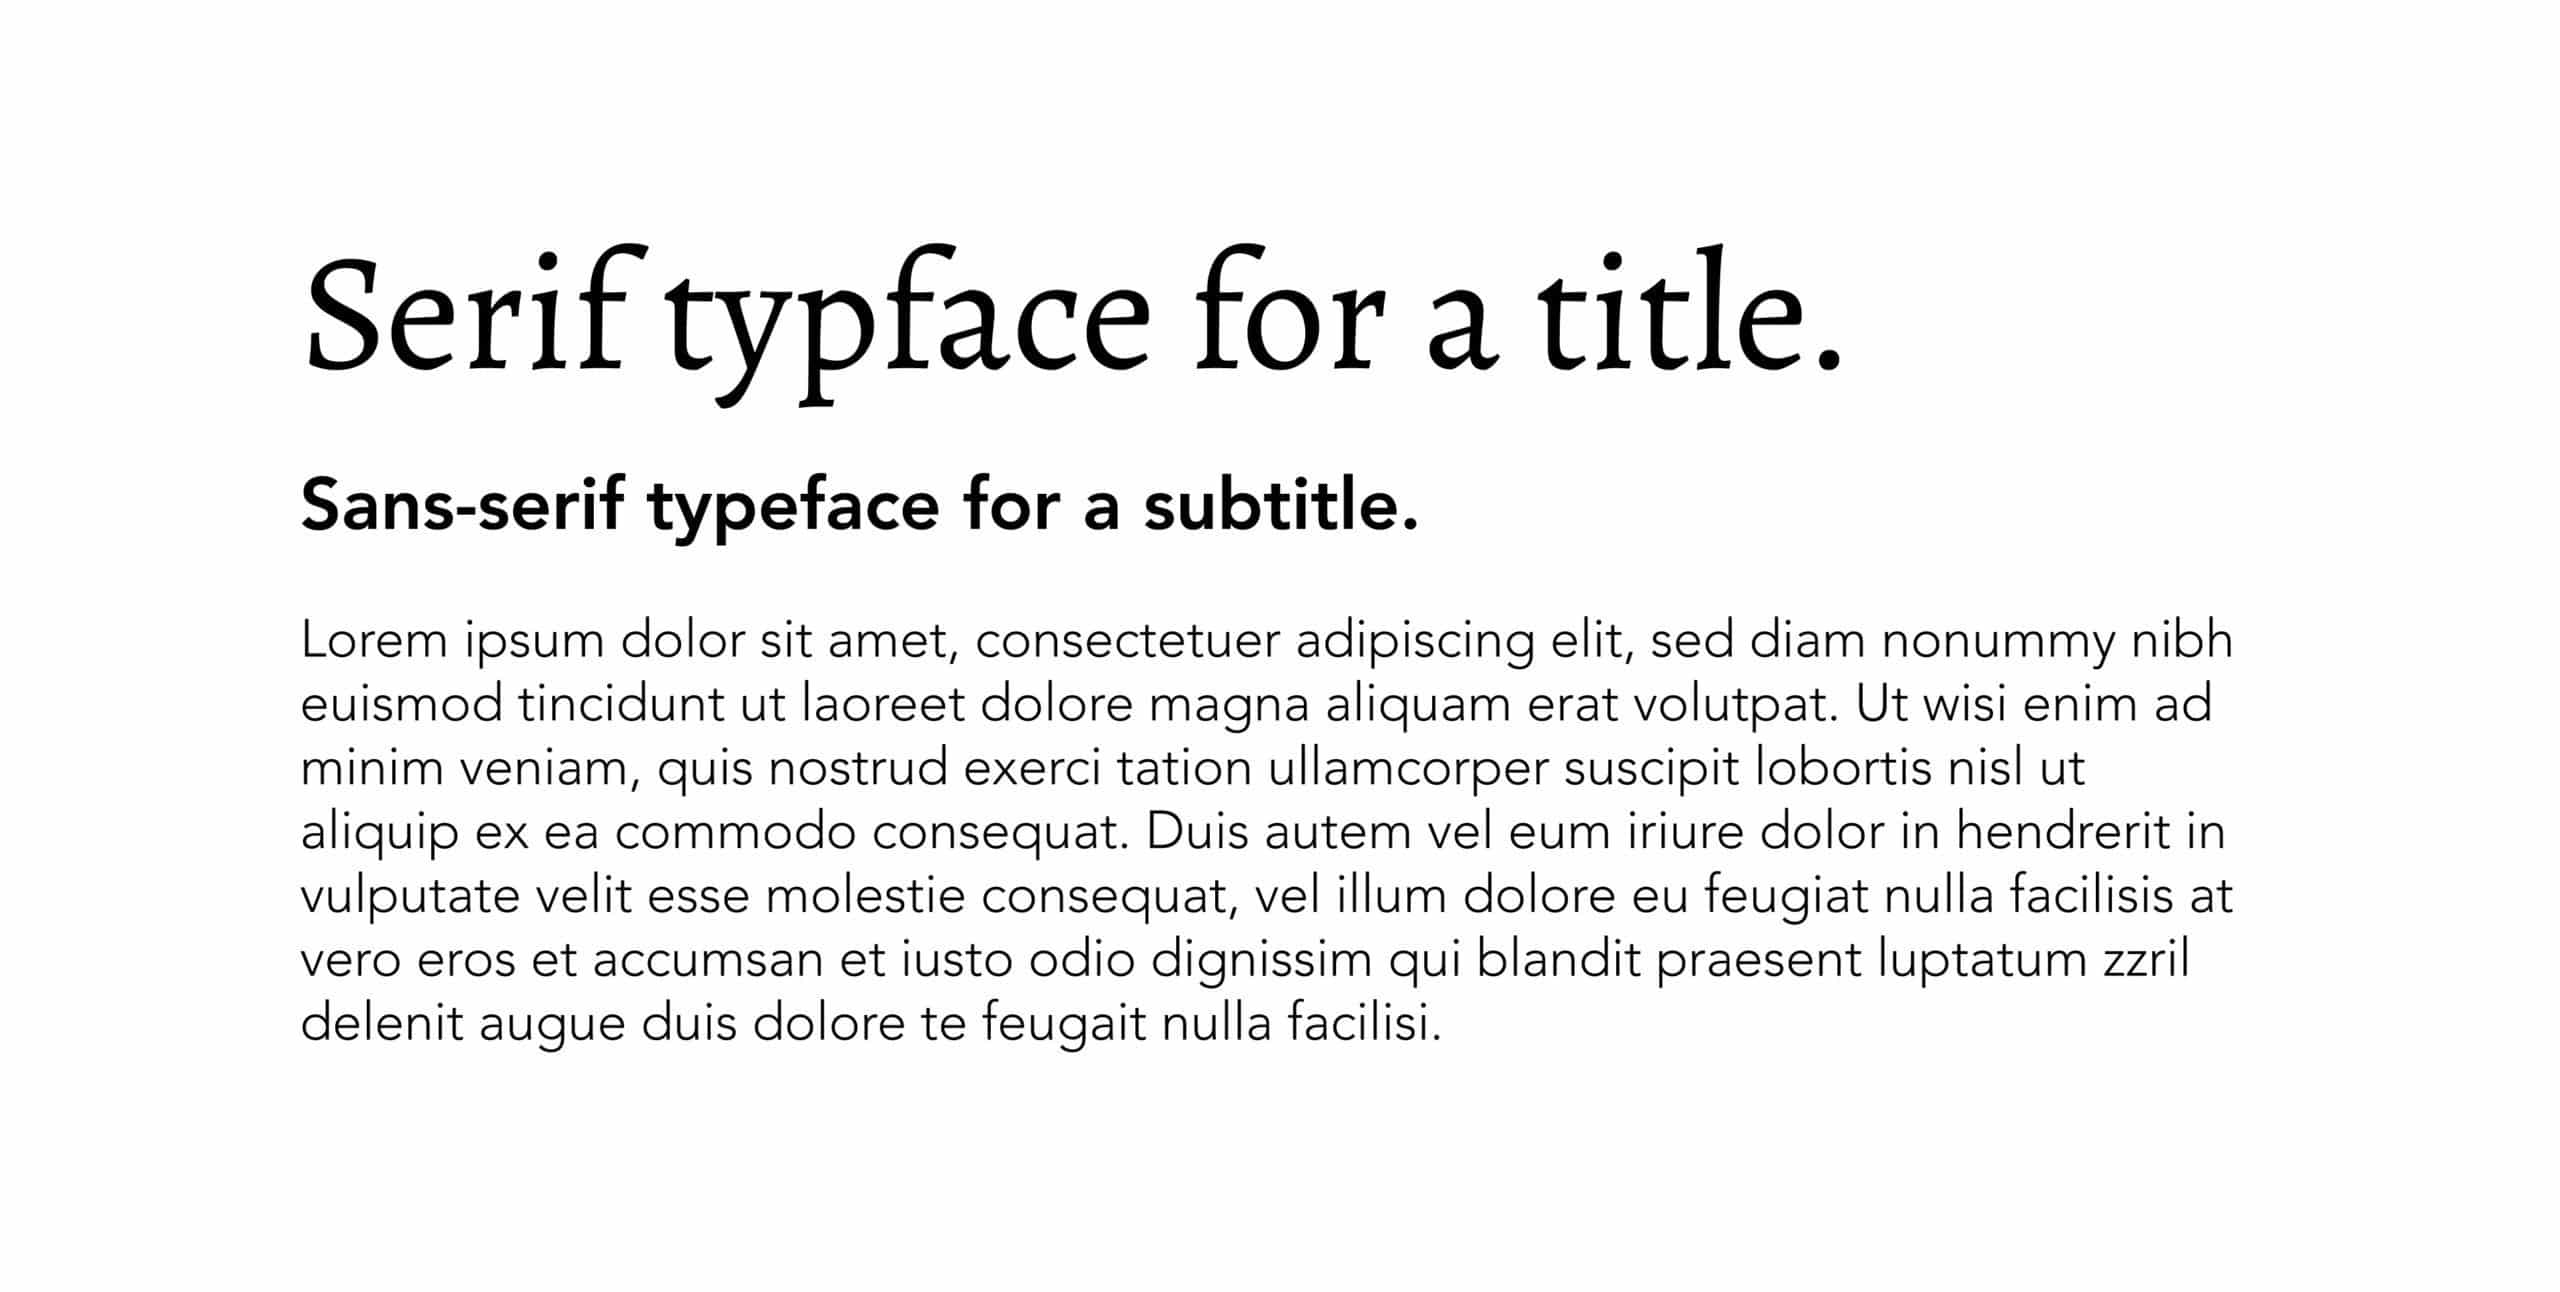 Title, Subtitle, and Body Typefaces Example